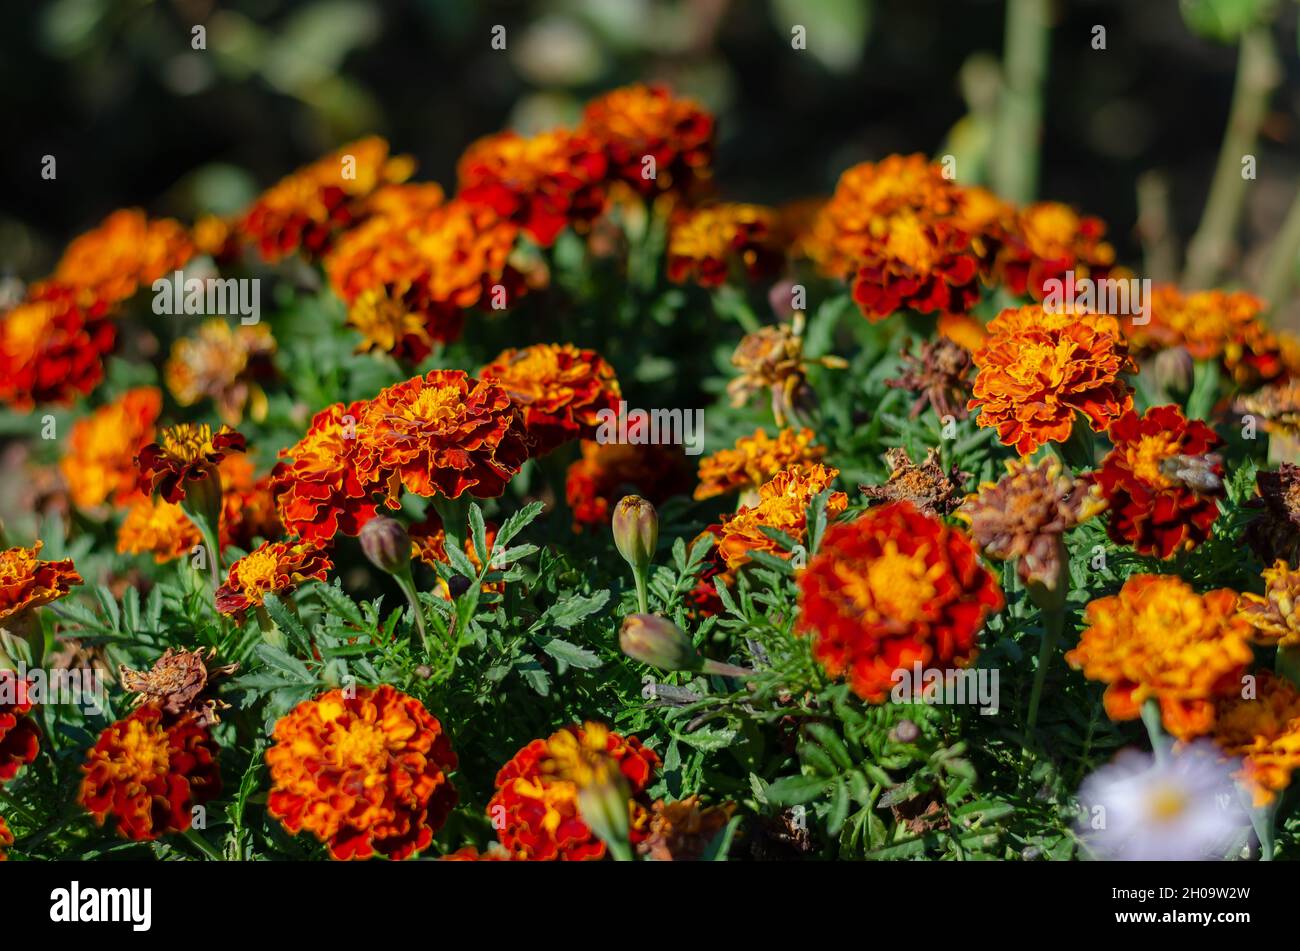 Beautiful orange flowers in a flower bed. Tagetes is a genus of annual or perennial, mostly herbaceous plants in the sunflower family Asteraceae. Sele Stock Photo